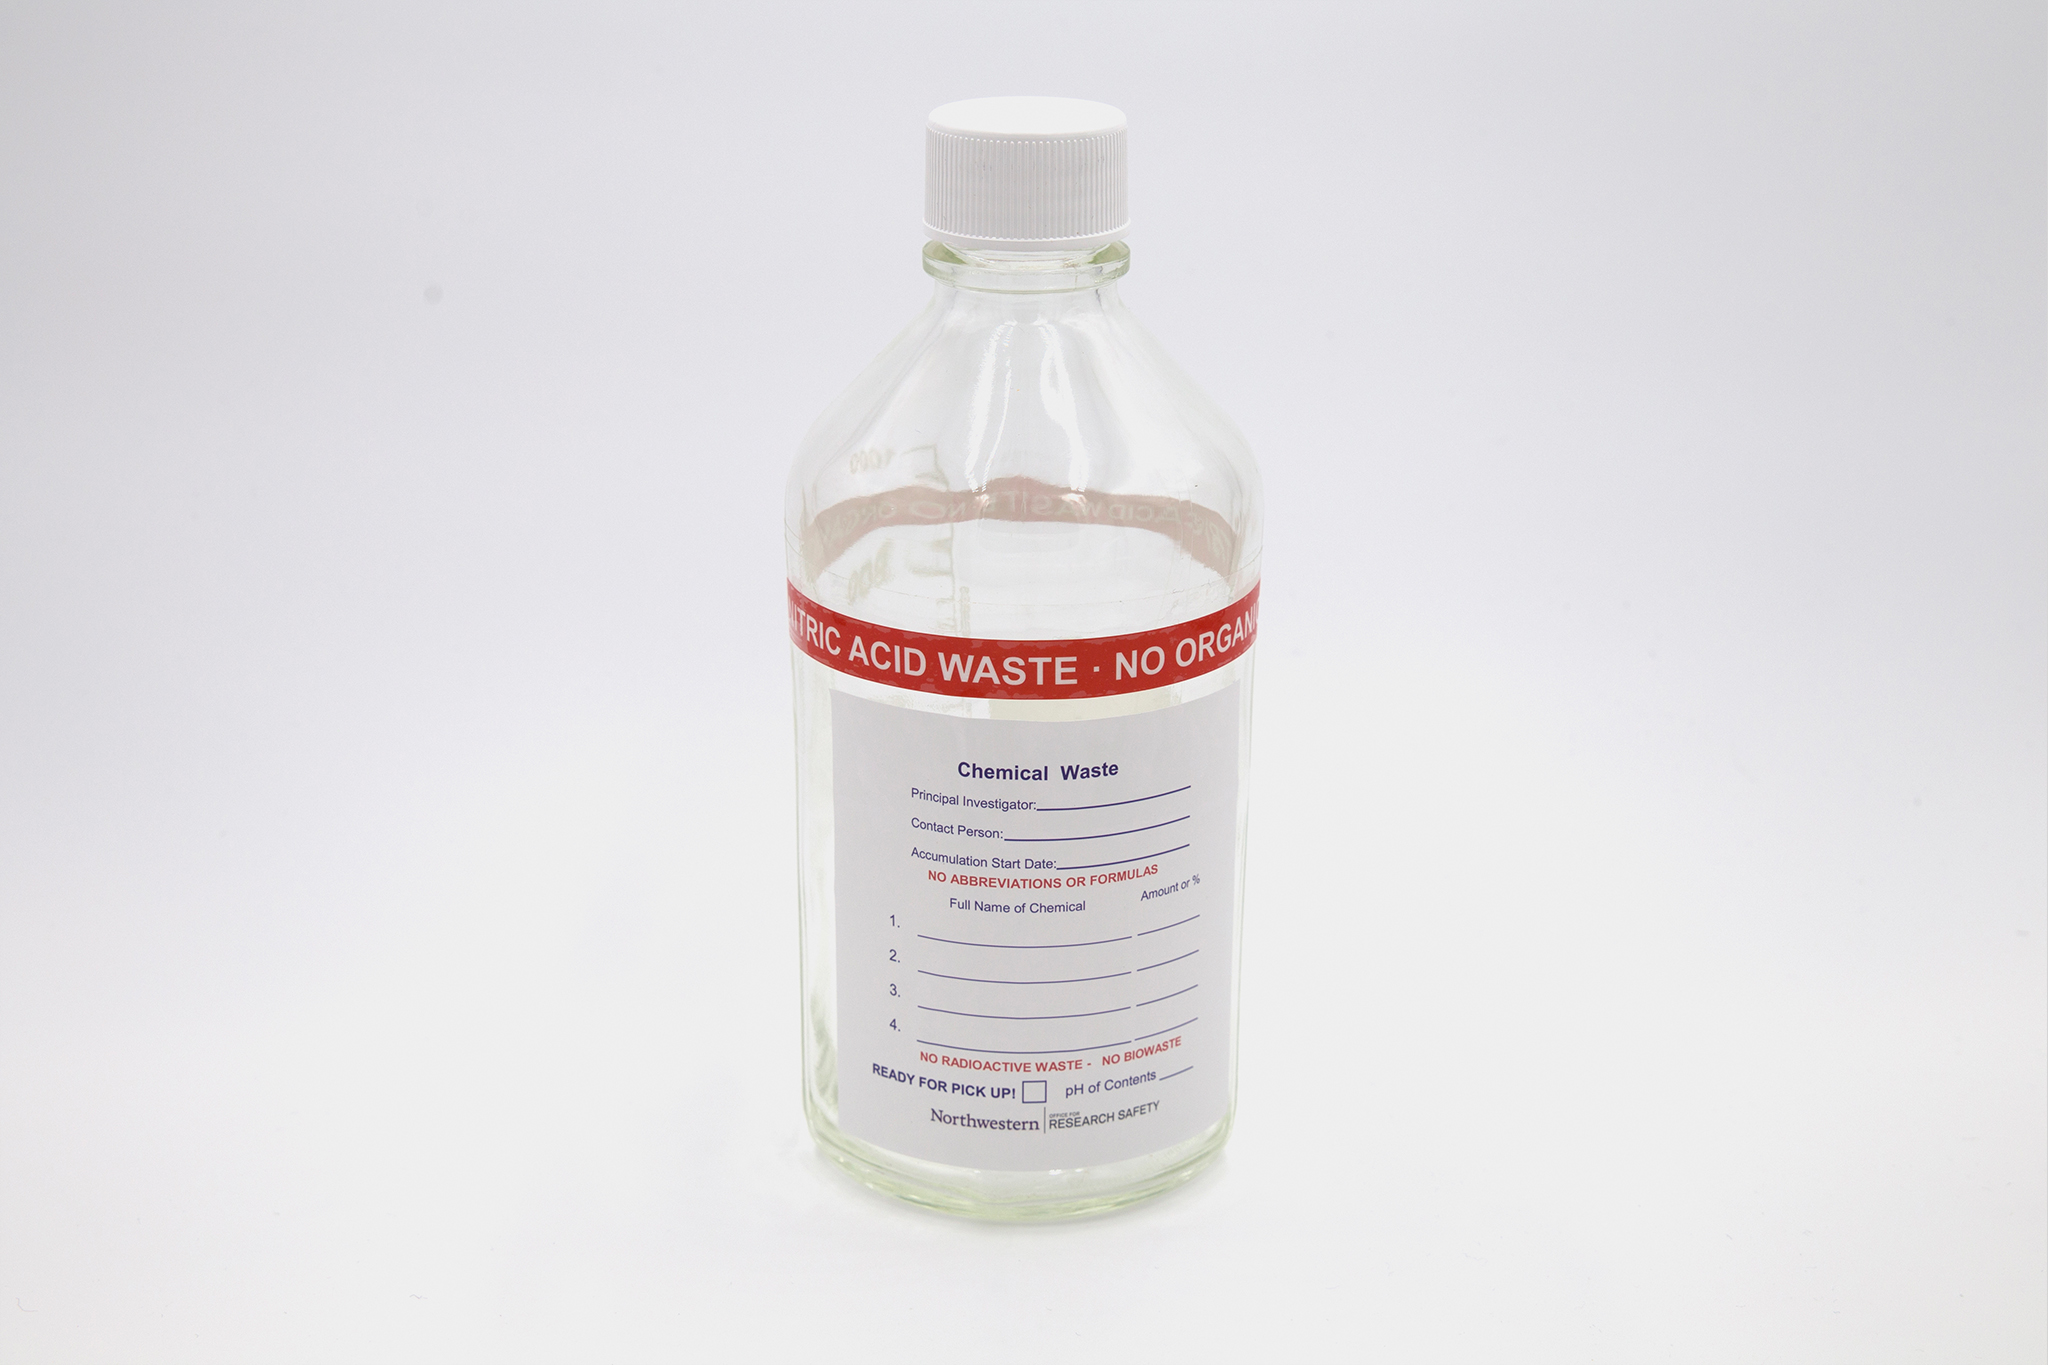 Clear waste bottle with nitric acid label on white background